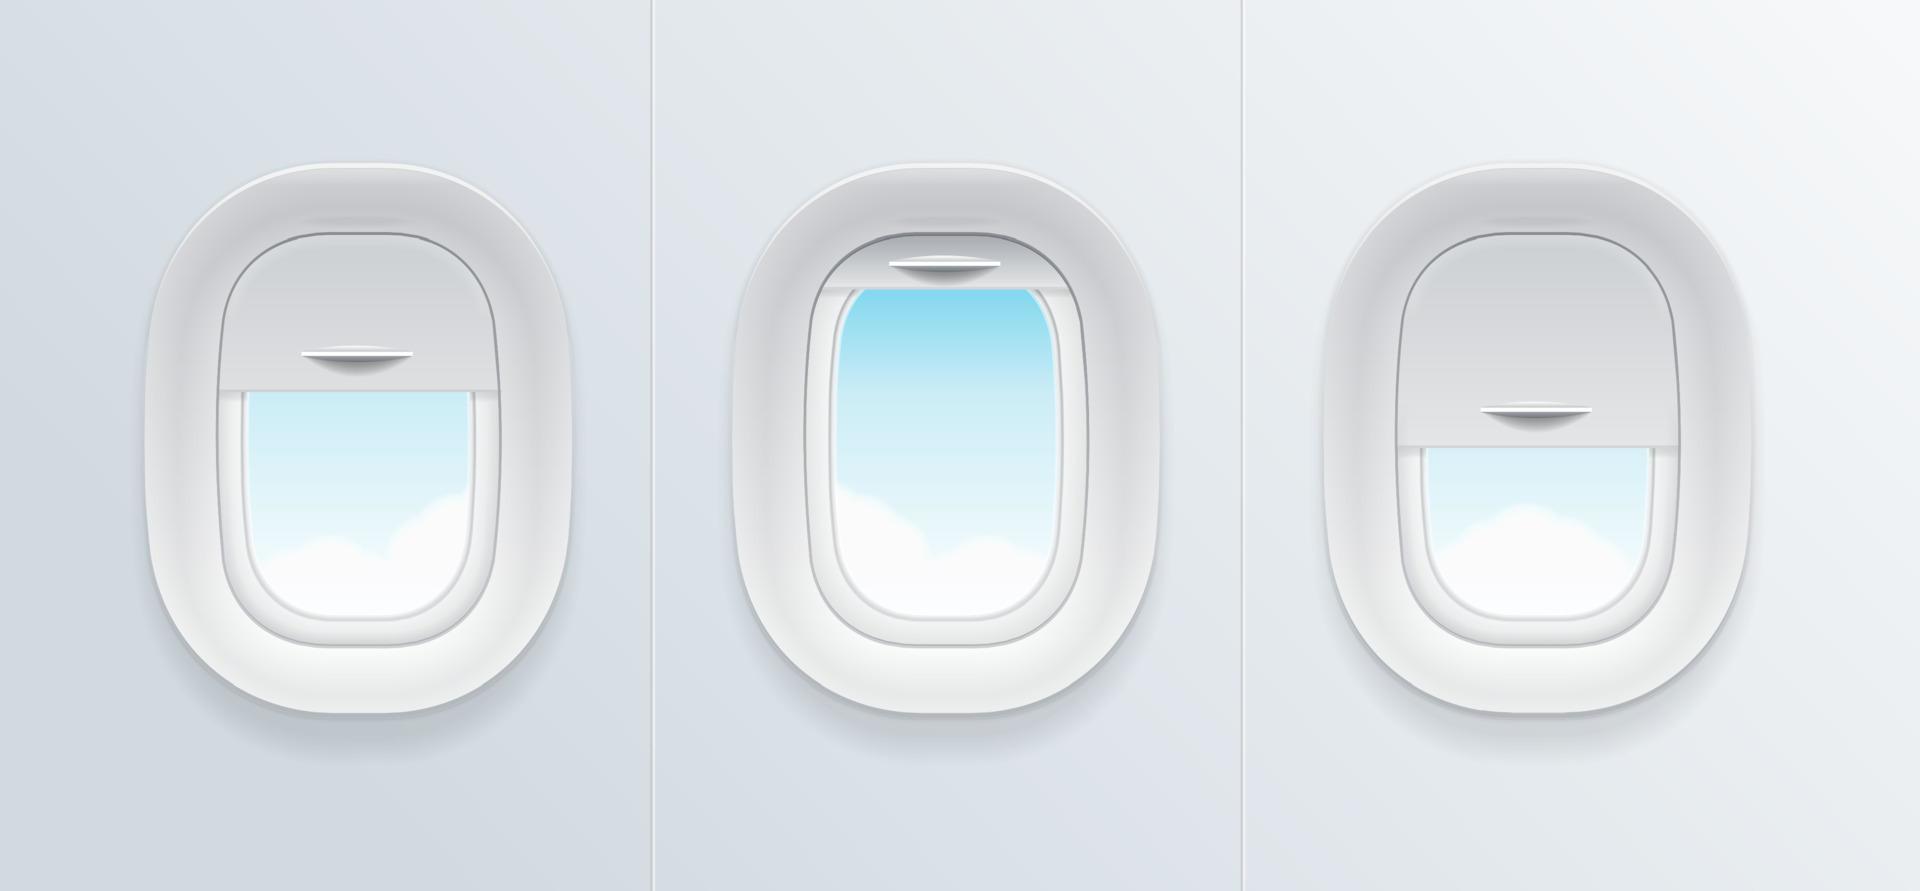 Realistic Detailed 3d Airplane Window with Blue Sky View Set. Vector